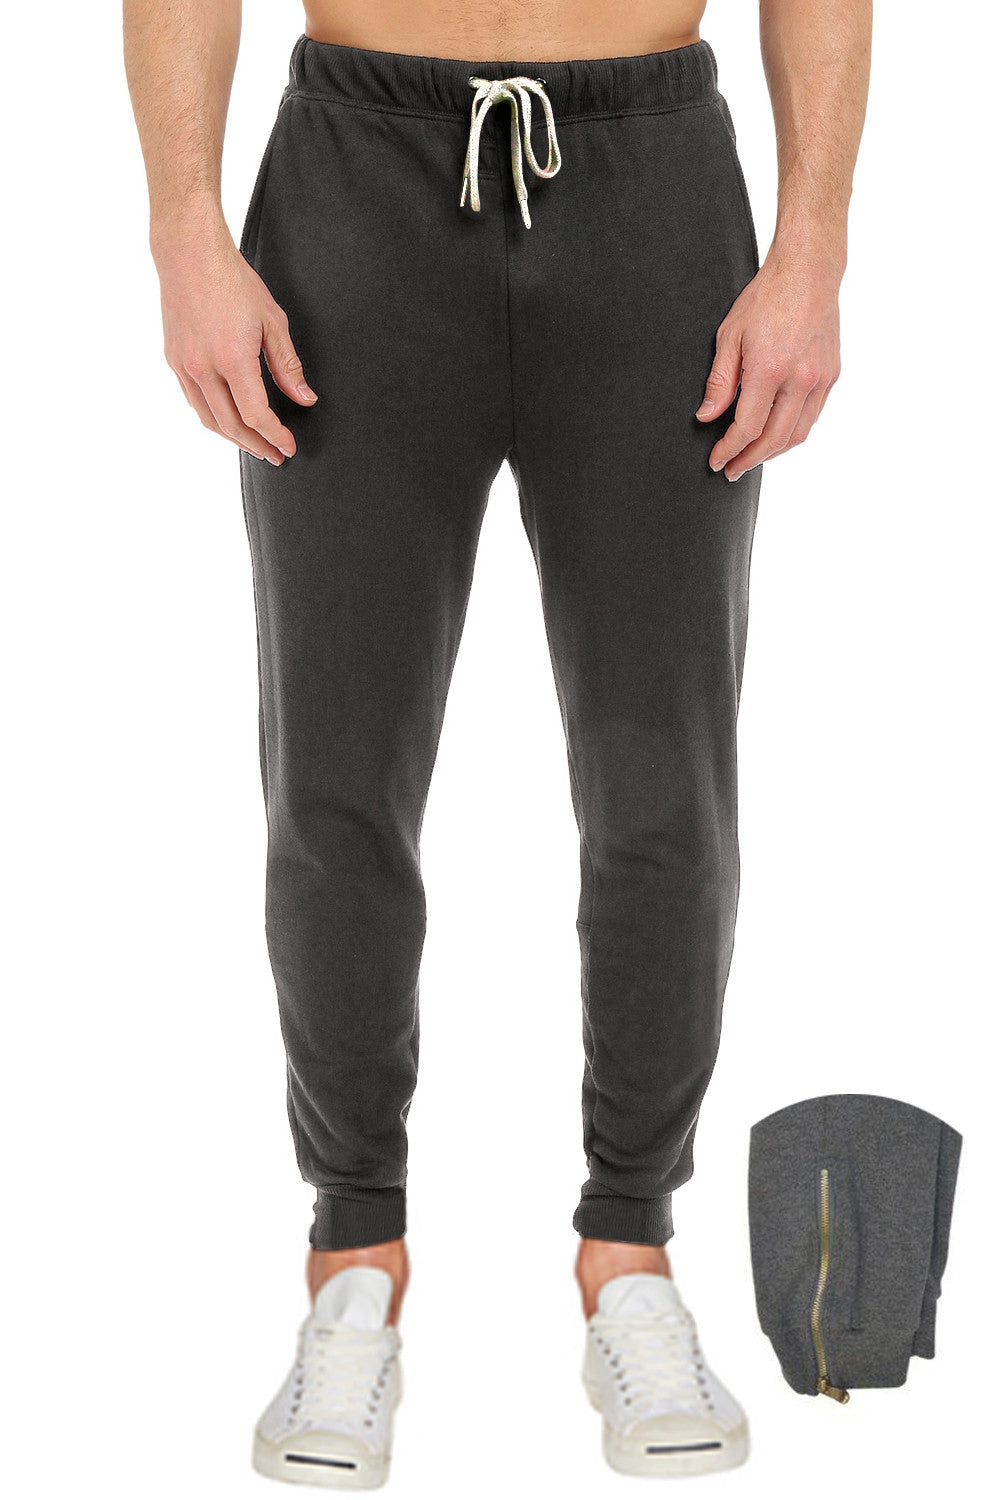 French Terry Charcoal Grey Pants with Zipper: Easy wear Pro 5 fleece bottoms for comfort & warmth. Elastic waist/ankle, leg zipper for shoe-friendly wear. Available Sizes S-XL, colors: Black, Grey, Camo. 60% Cotton 40% Poly.